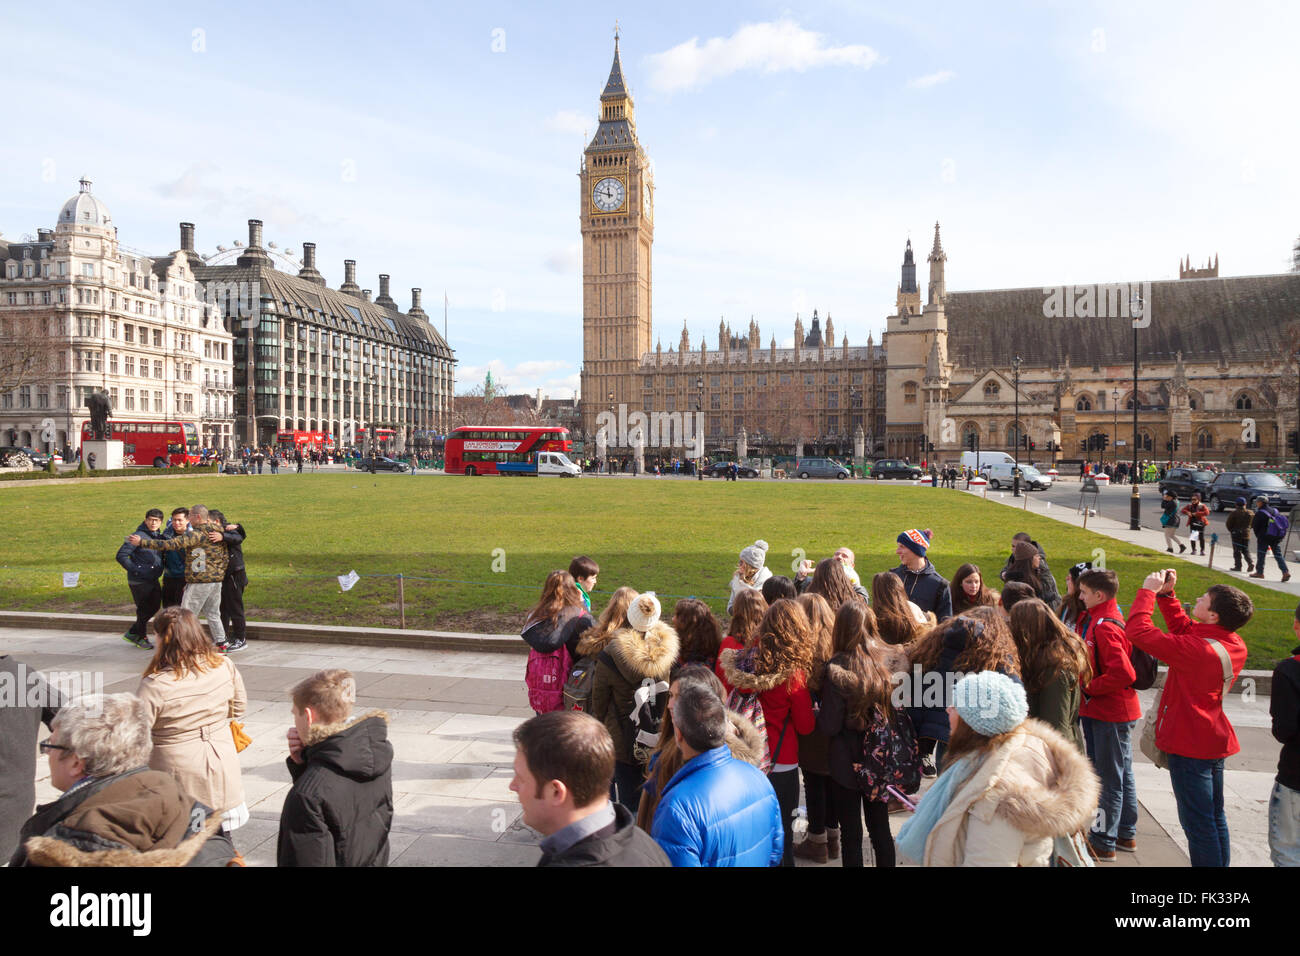 Tourists in Parliament Square with the Houses of Parliament and Big Ben, central London UK Stock Photo